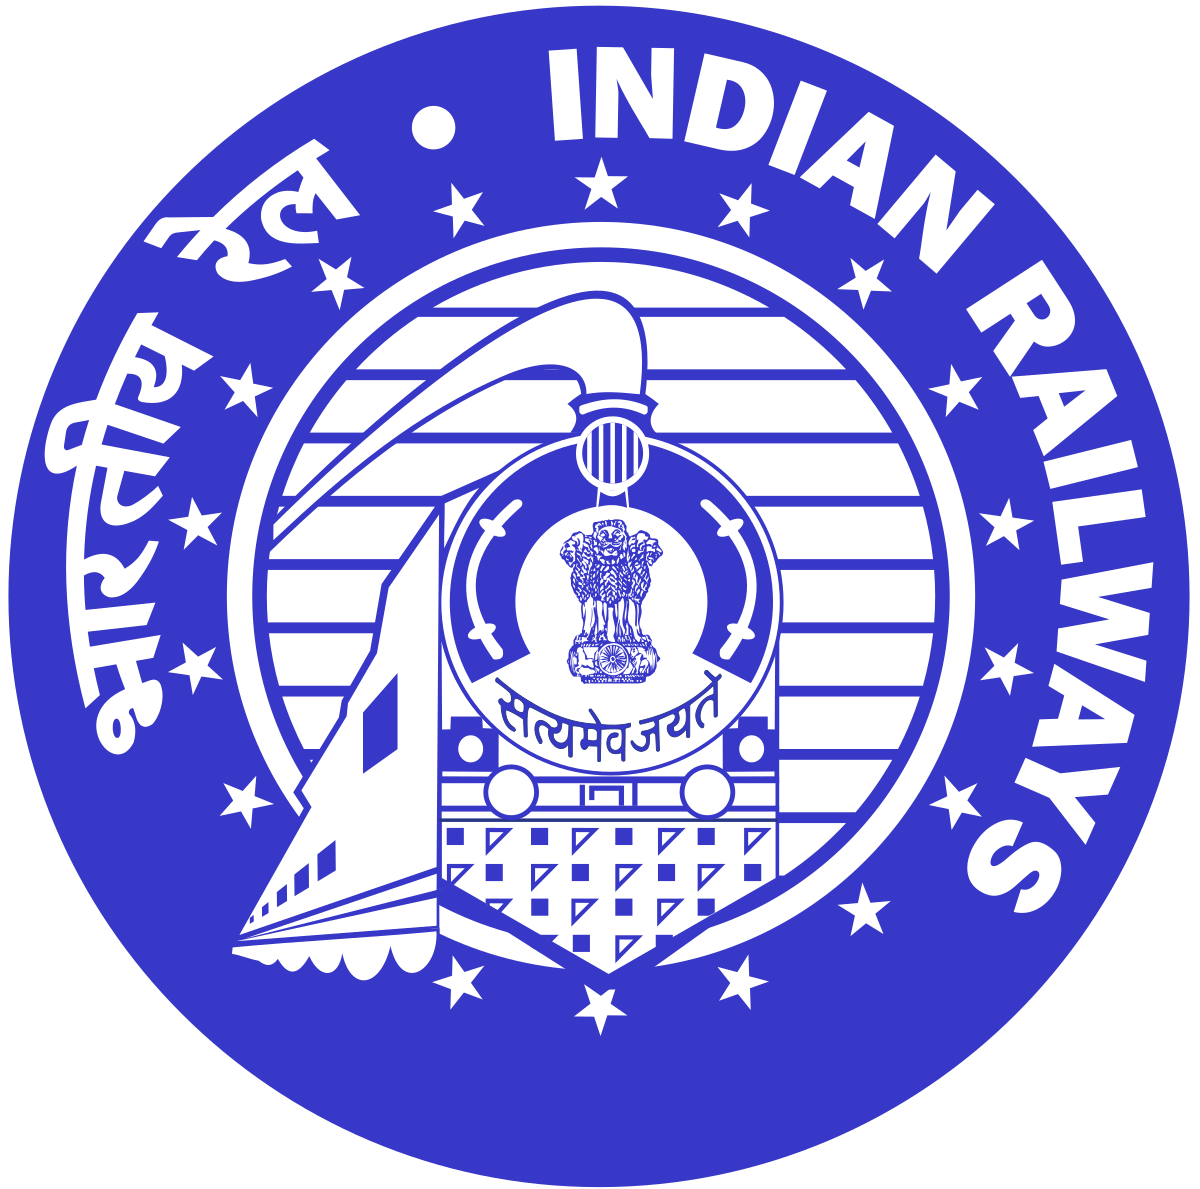 Take The Indian Railways Quiz! - featured, Indian history, Indian Railways, Open Roads, quiz, railways, trains, Travel